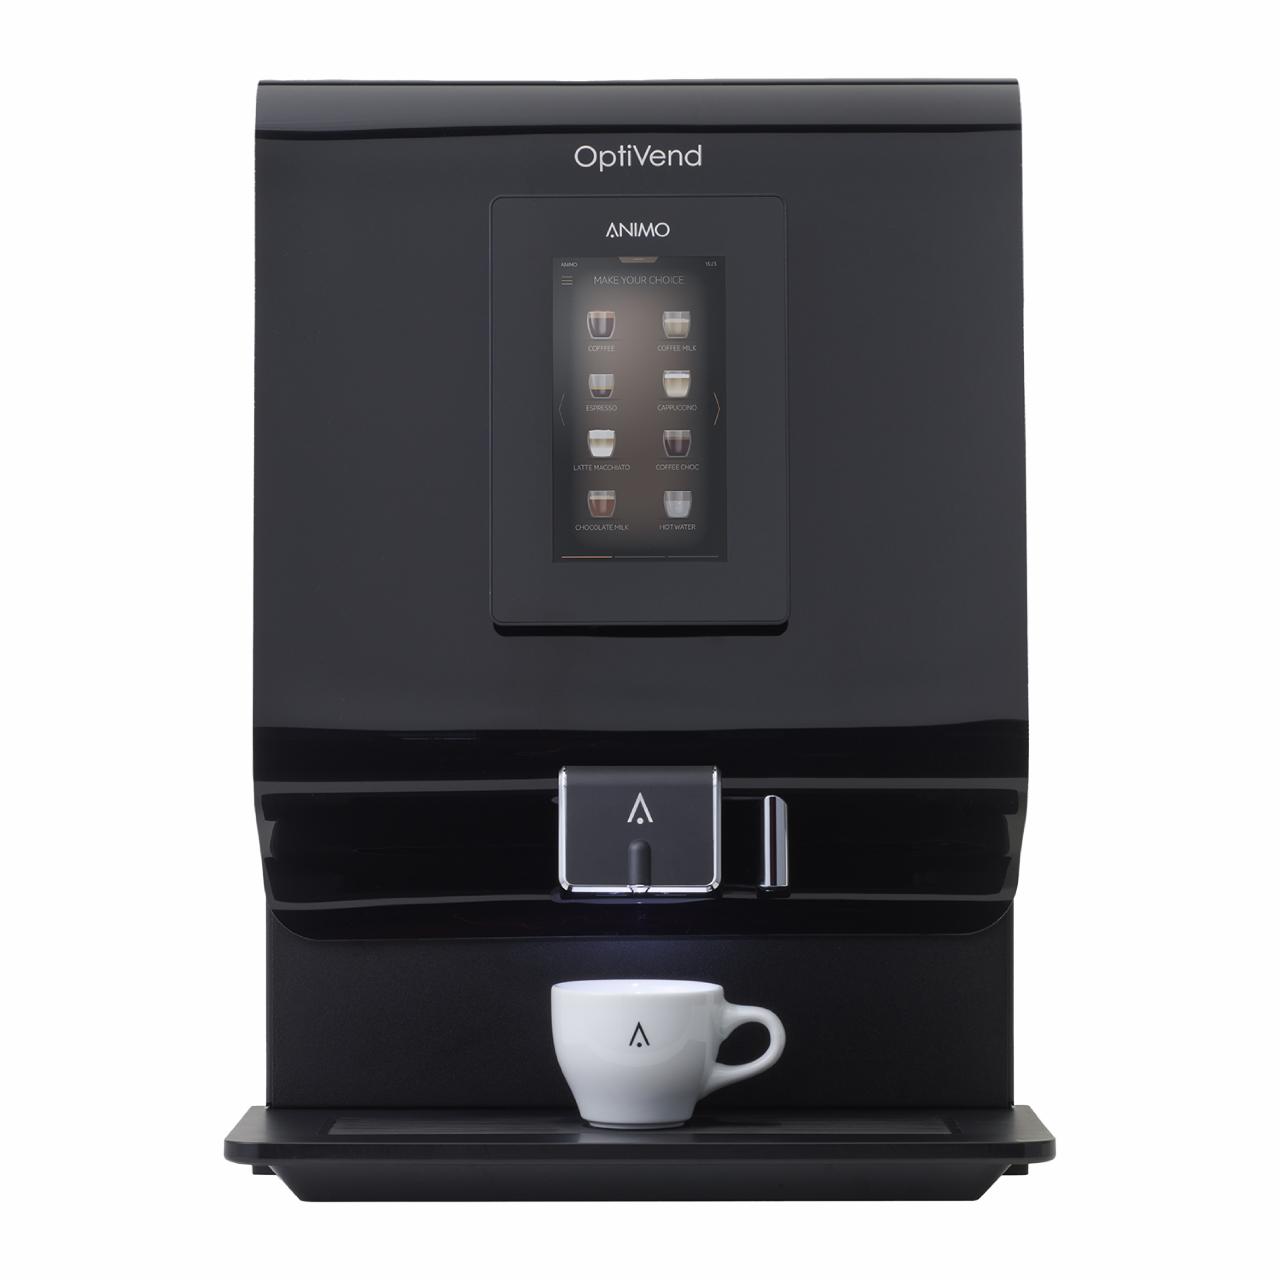 Animo Optivend 32 Touch - Instant Kaffe